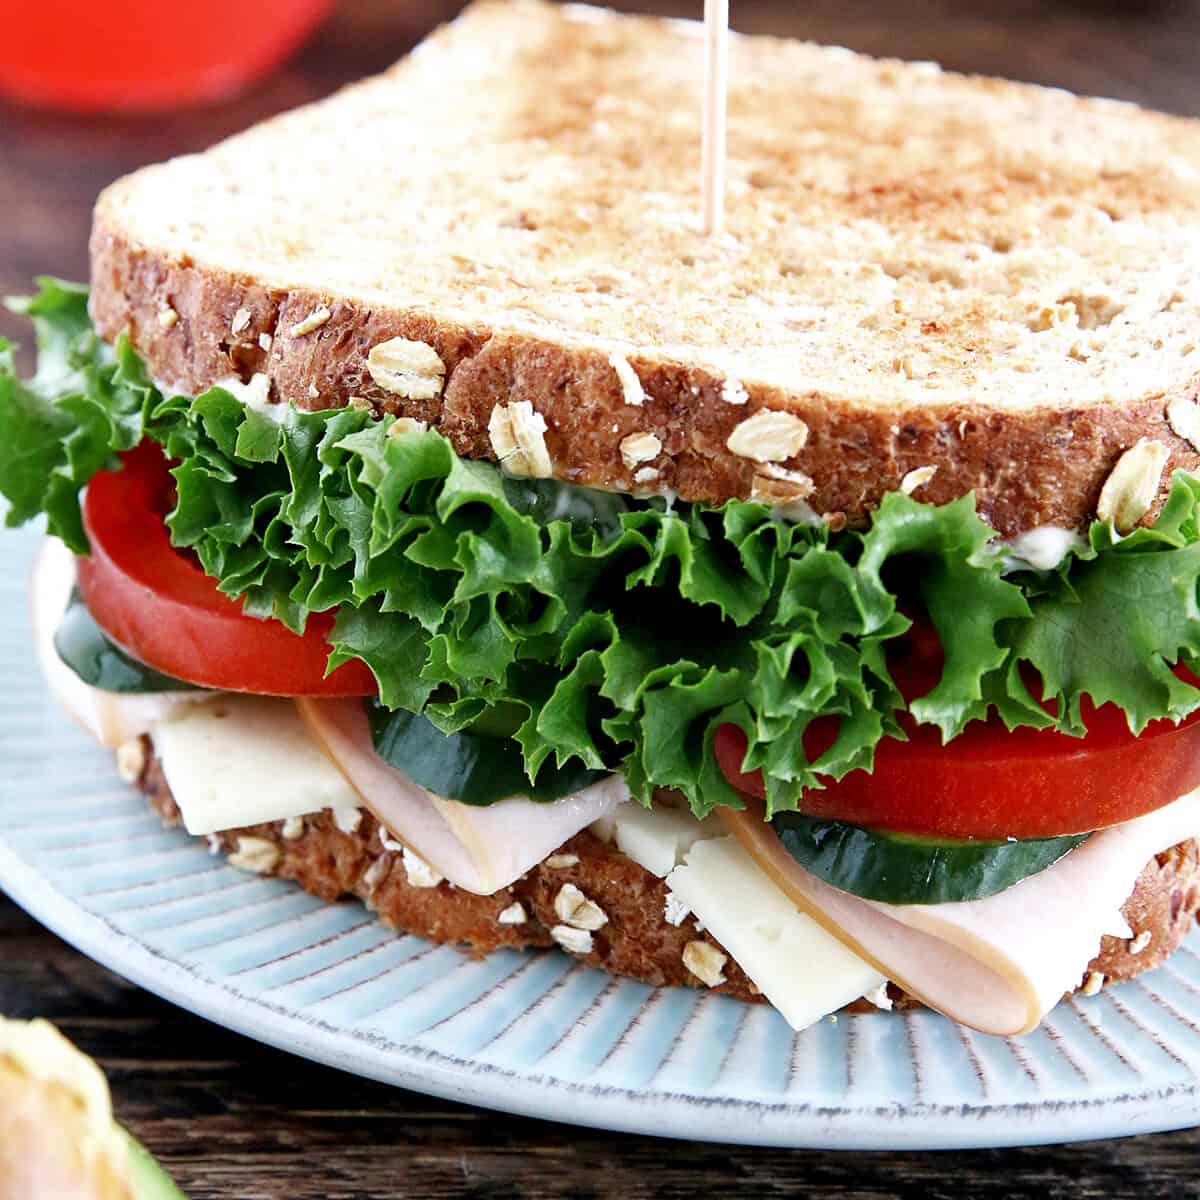 This Turkey Sandwich Recipe is one of our favorite sandwiches. The sandwich is loaded with vegetables of homegrown cucumber and tomatoes which makes it taste absolutely desirable.